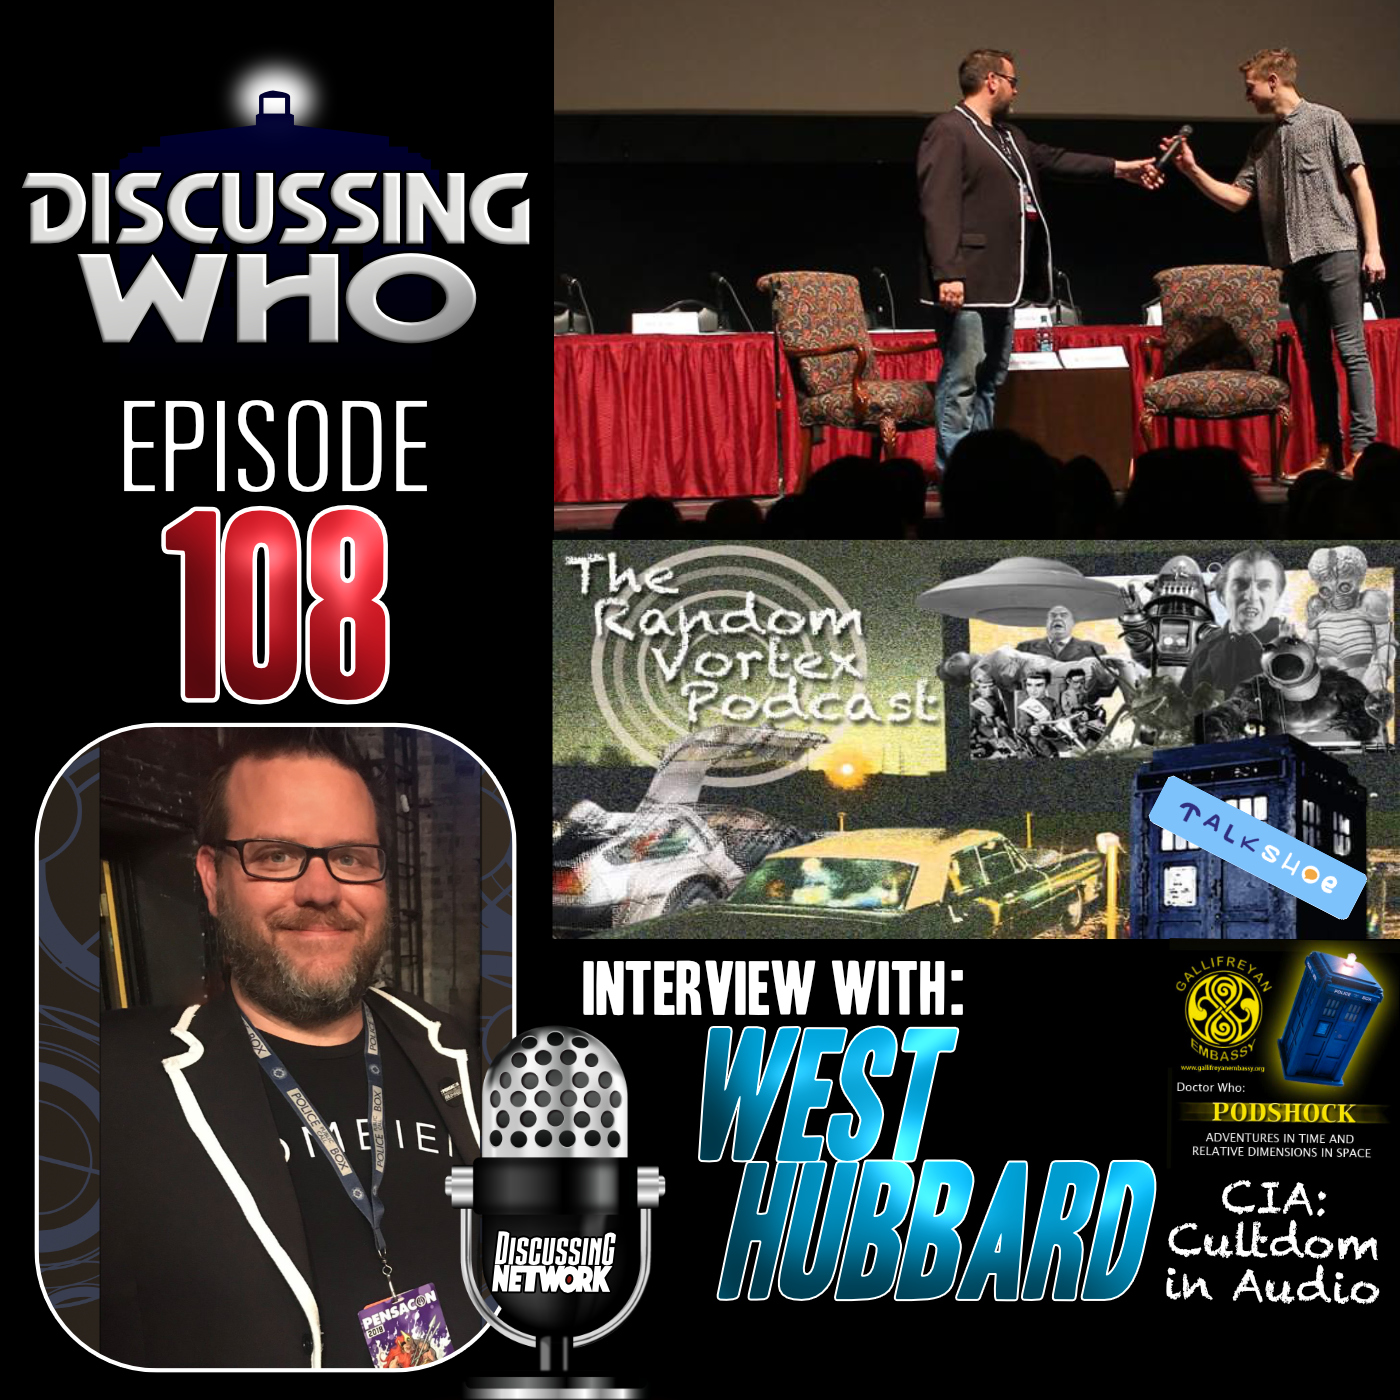 Interview with West Hubbard of Cutldom in Audio, Doctor Who Podshock, Pensacon and more